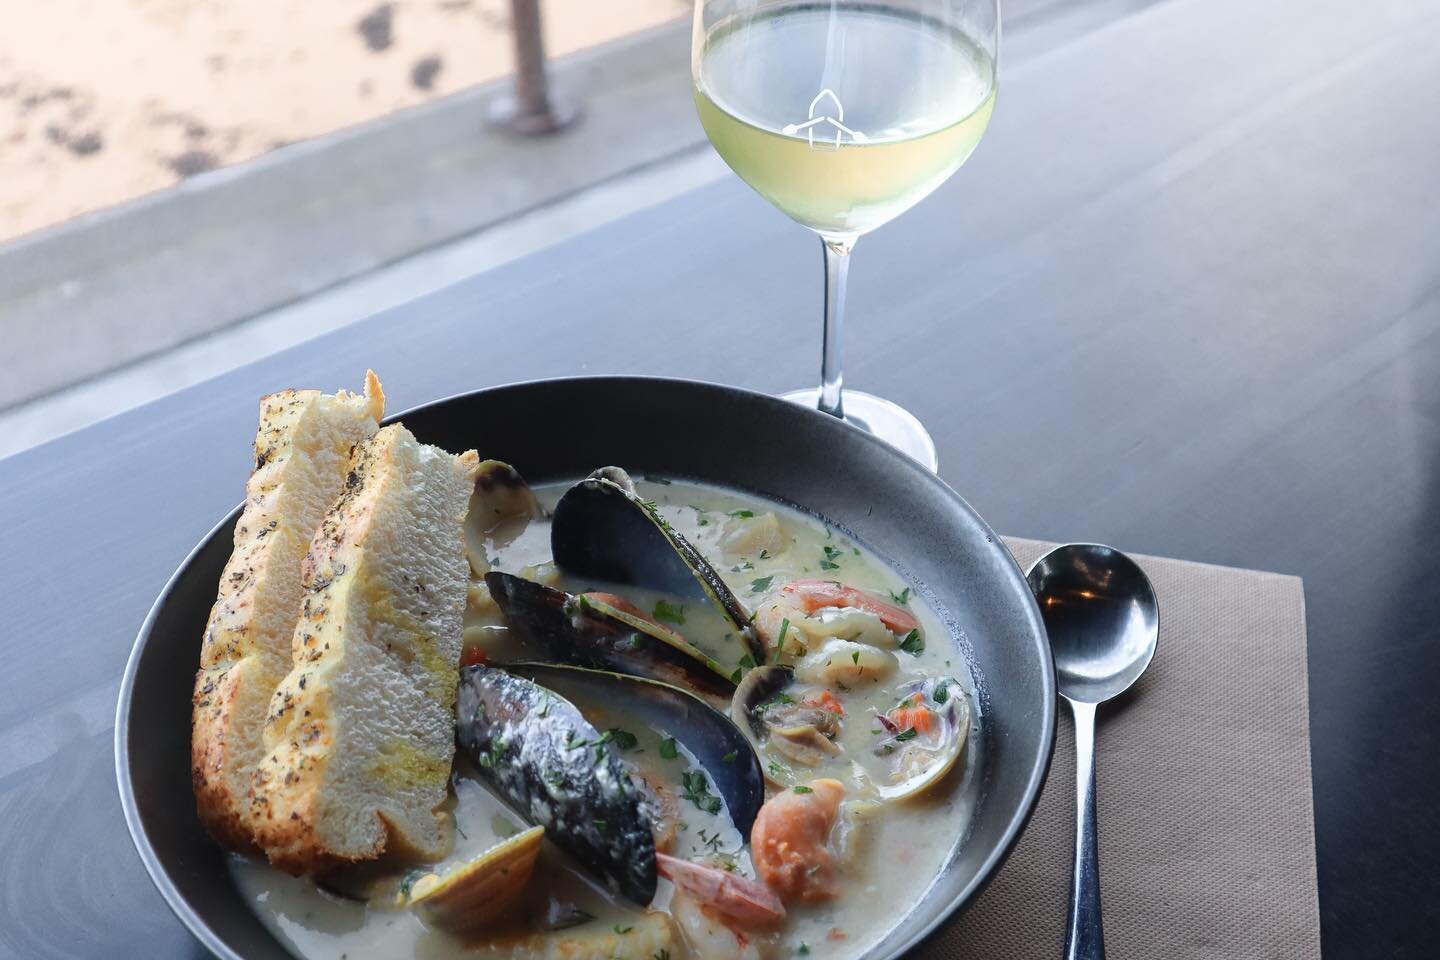 Watch the rain roll in over the water and stay warm with our house made and locally sourced seafood chowder.

Available for both lunch and dinner. Book a table via our website www.saltwaterphillipisland.com.au or come in to grab a table